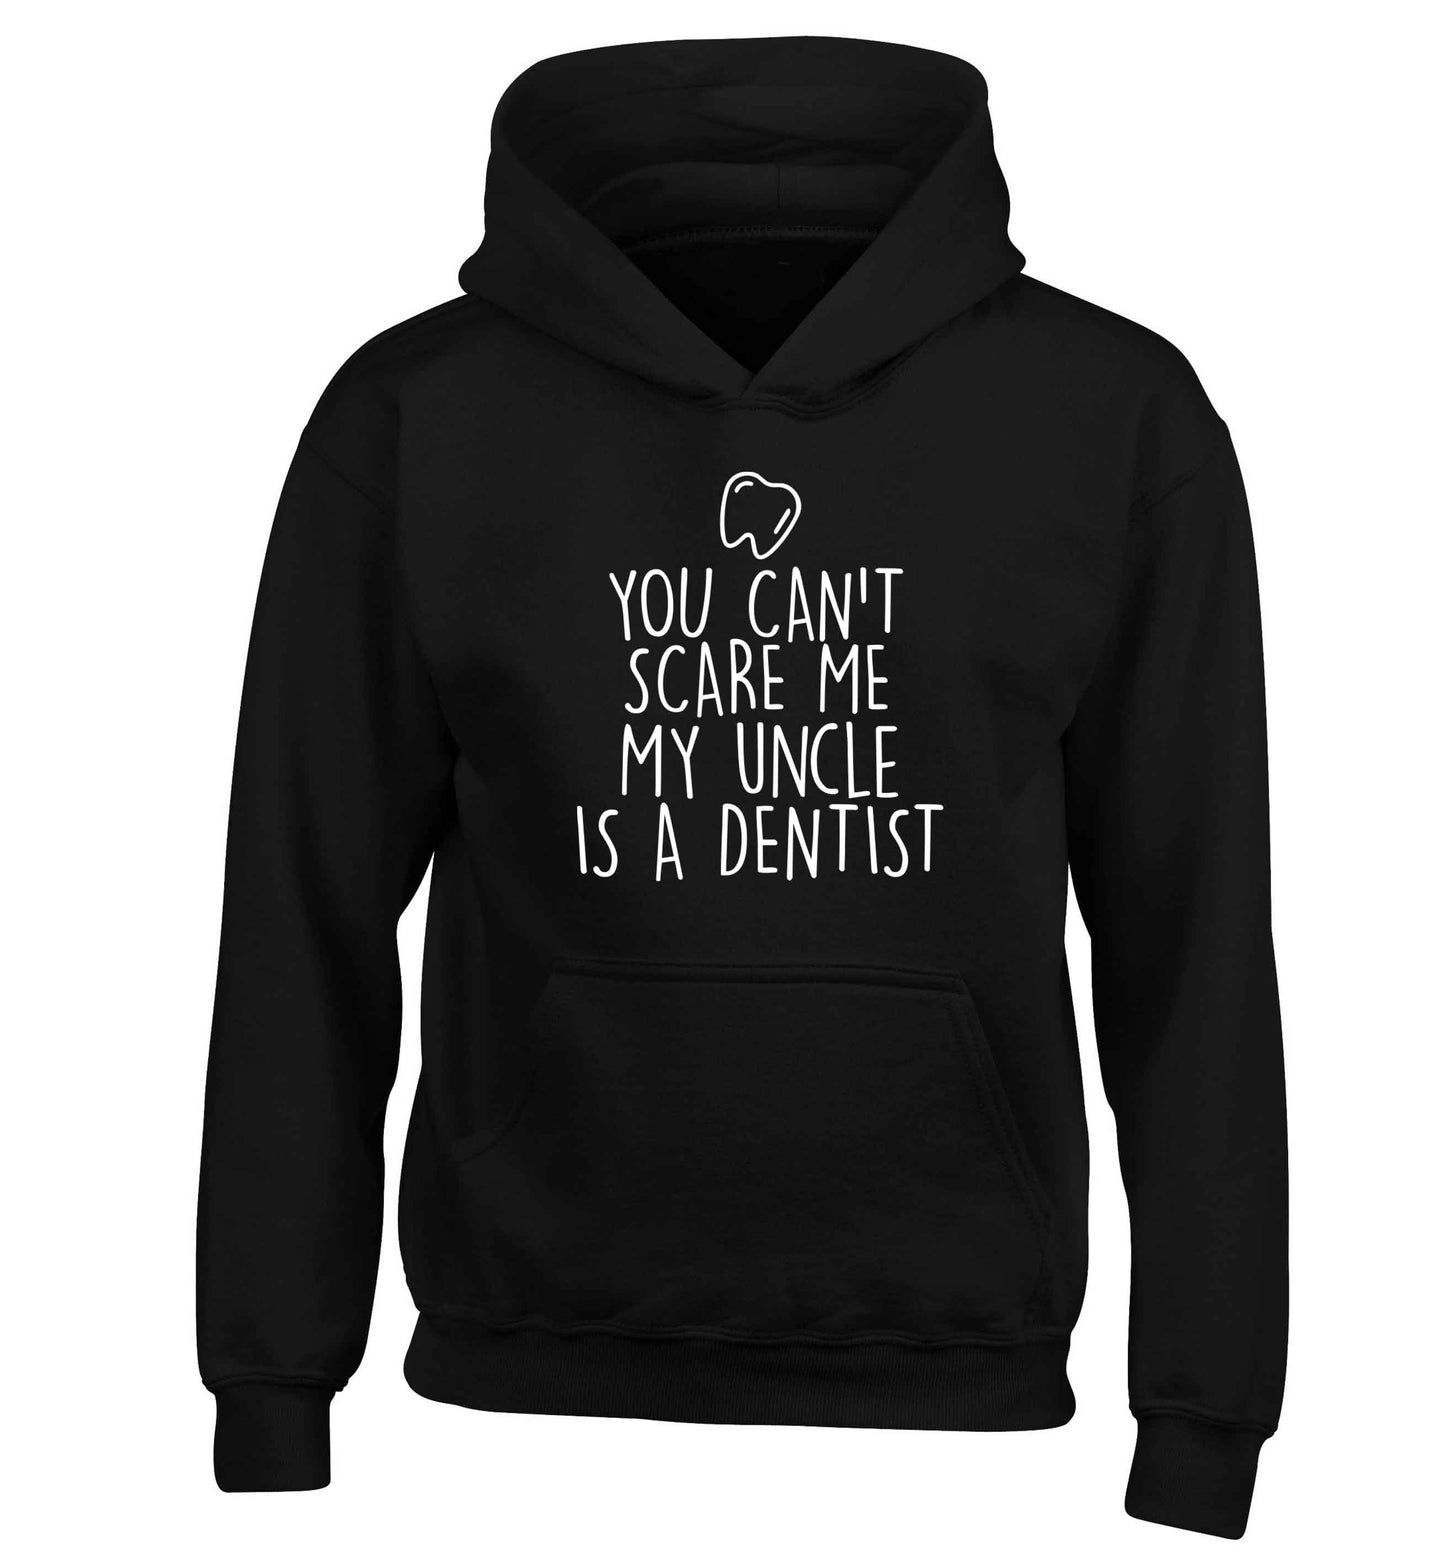 You can't scare me my uncle is a dentist children's black hoodie 12-13 Years